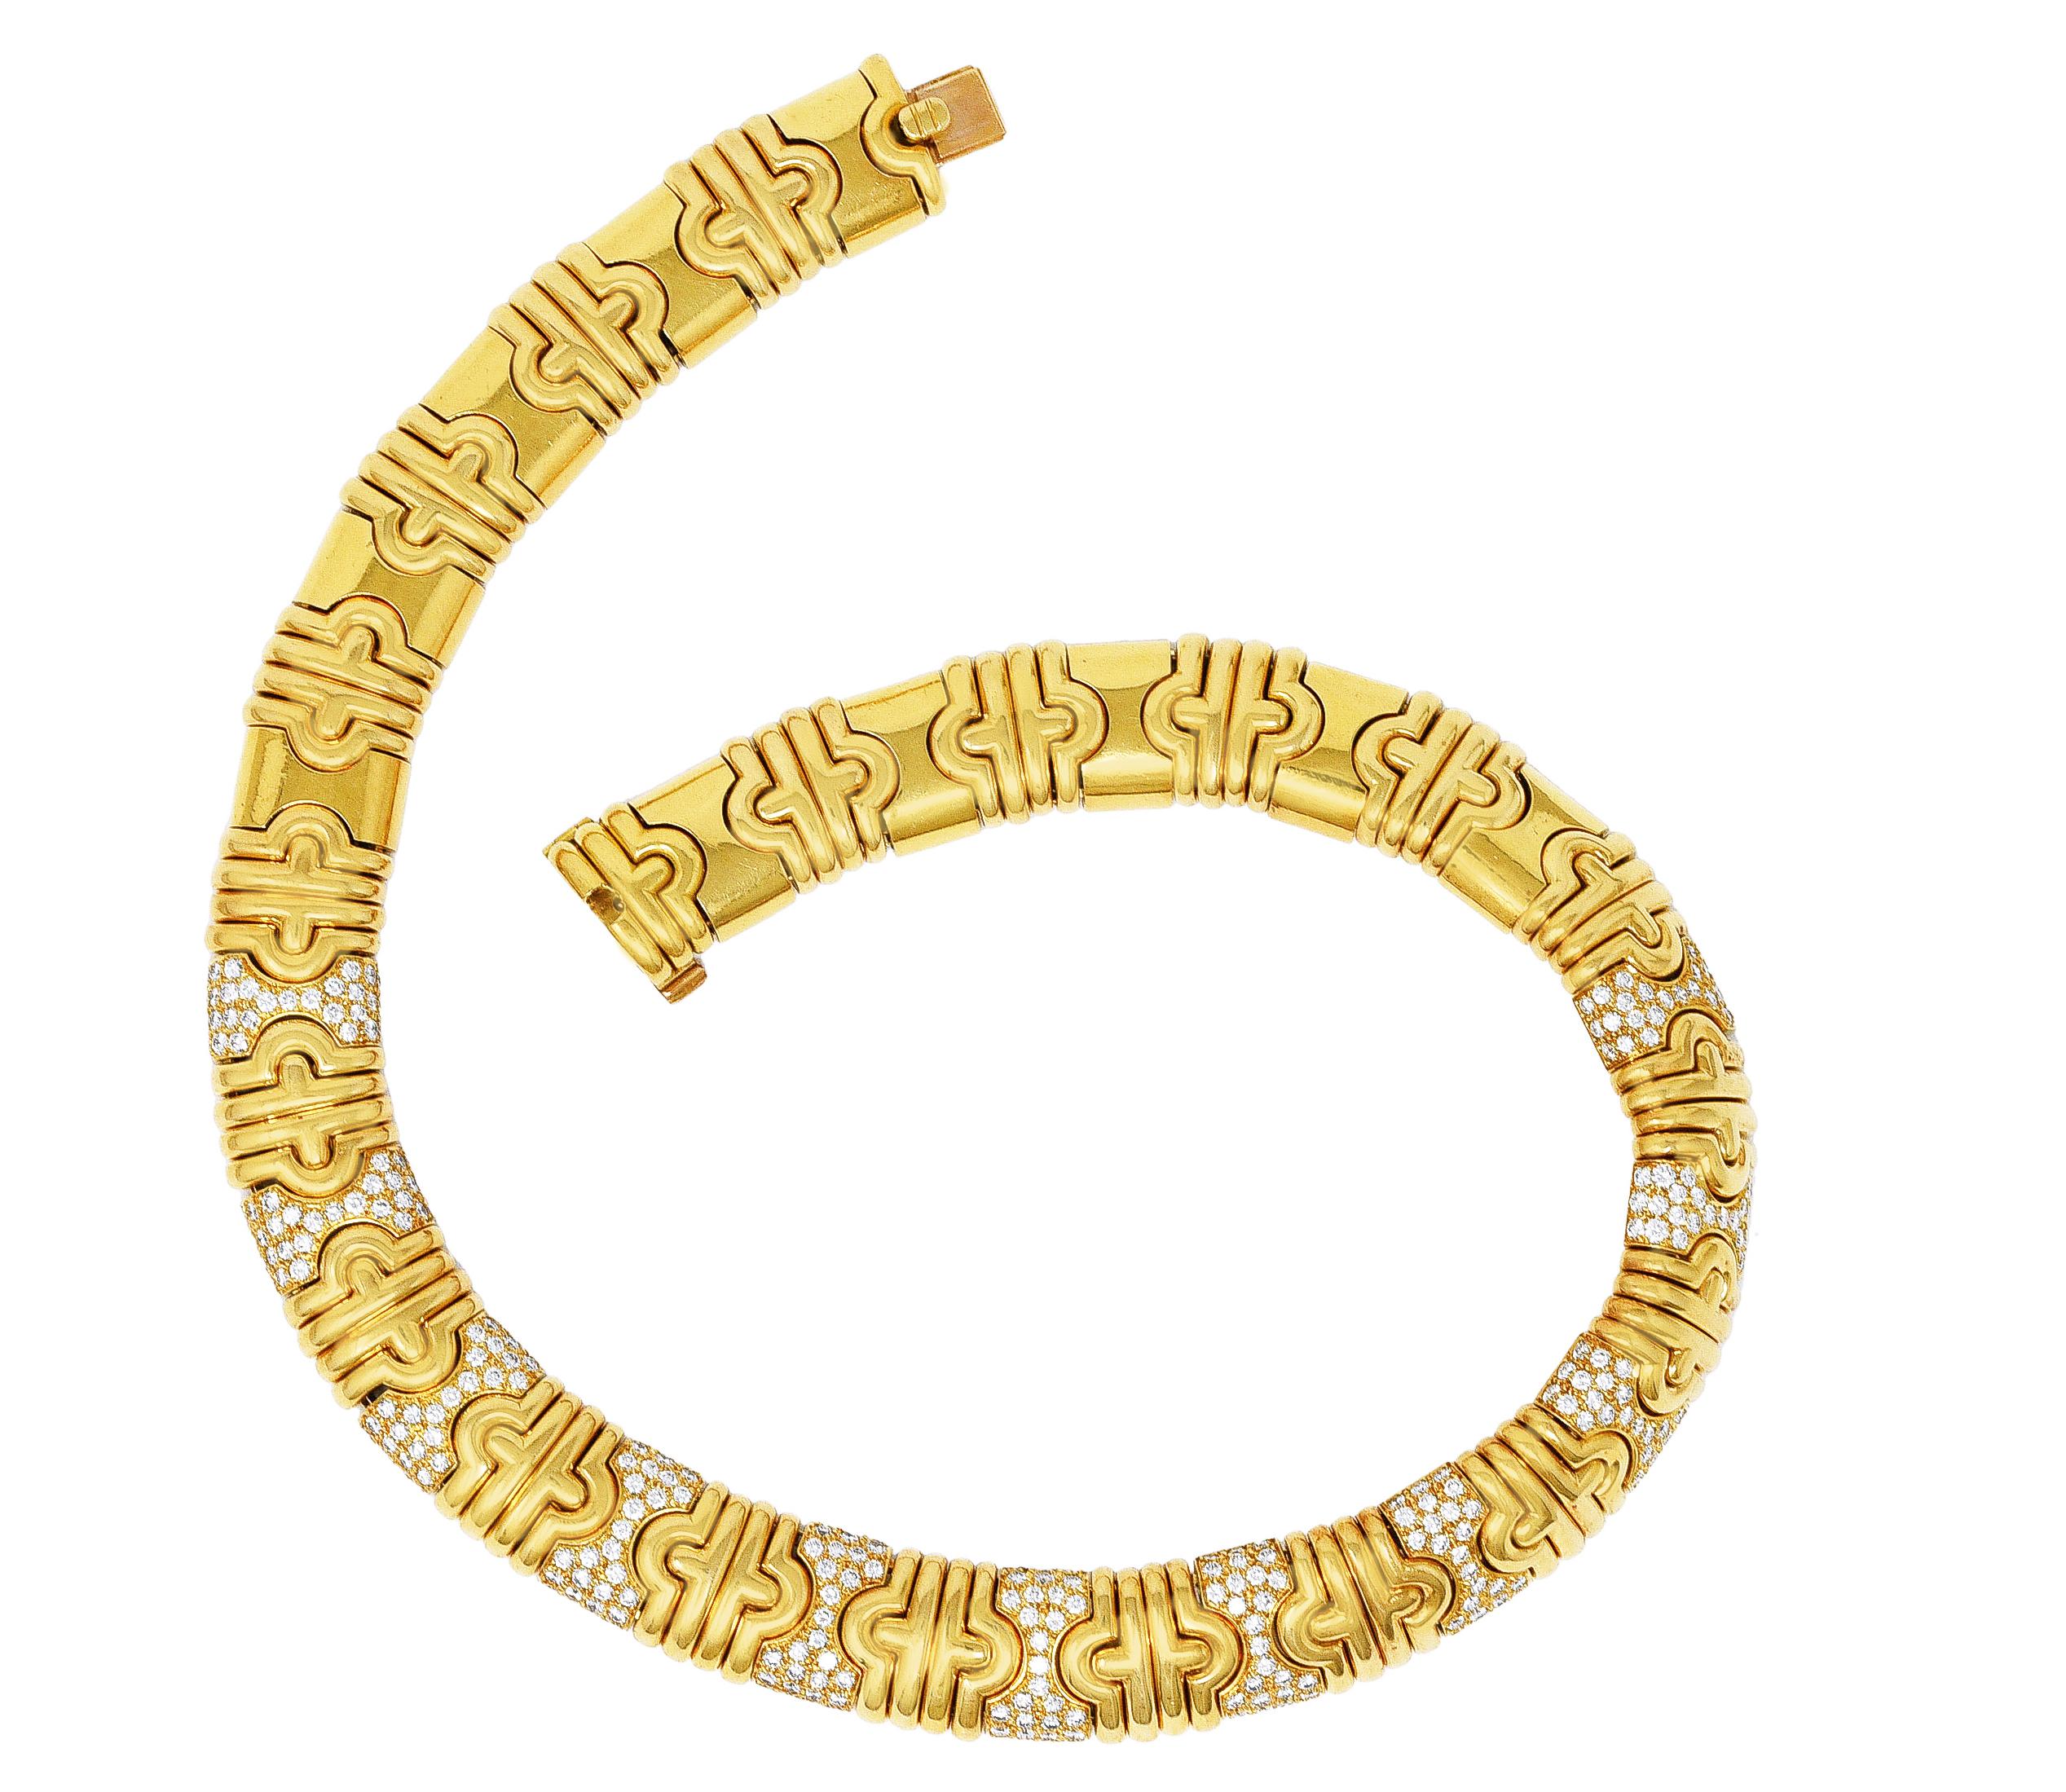 Collar style necklace is comprised of interlocking hourglass links with ribbed arch links. Hourglass links are pavè set with round brilliant cut diamonds. Weighing in total approximately 8.50 carats - F/G color with VS clarity. Completed by a